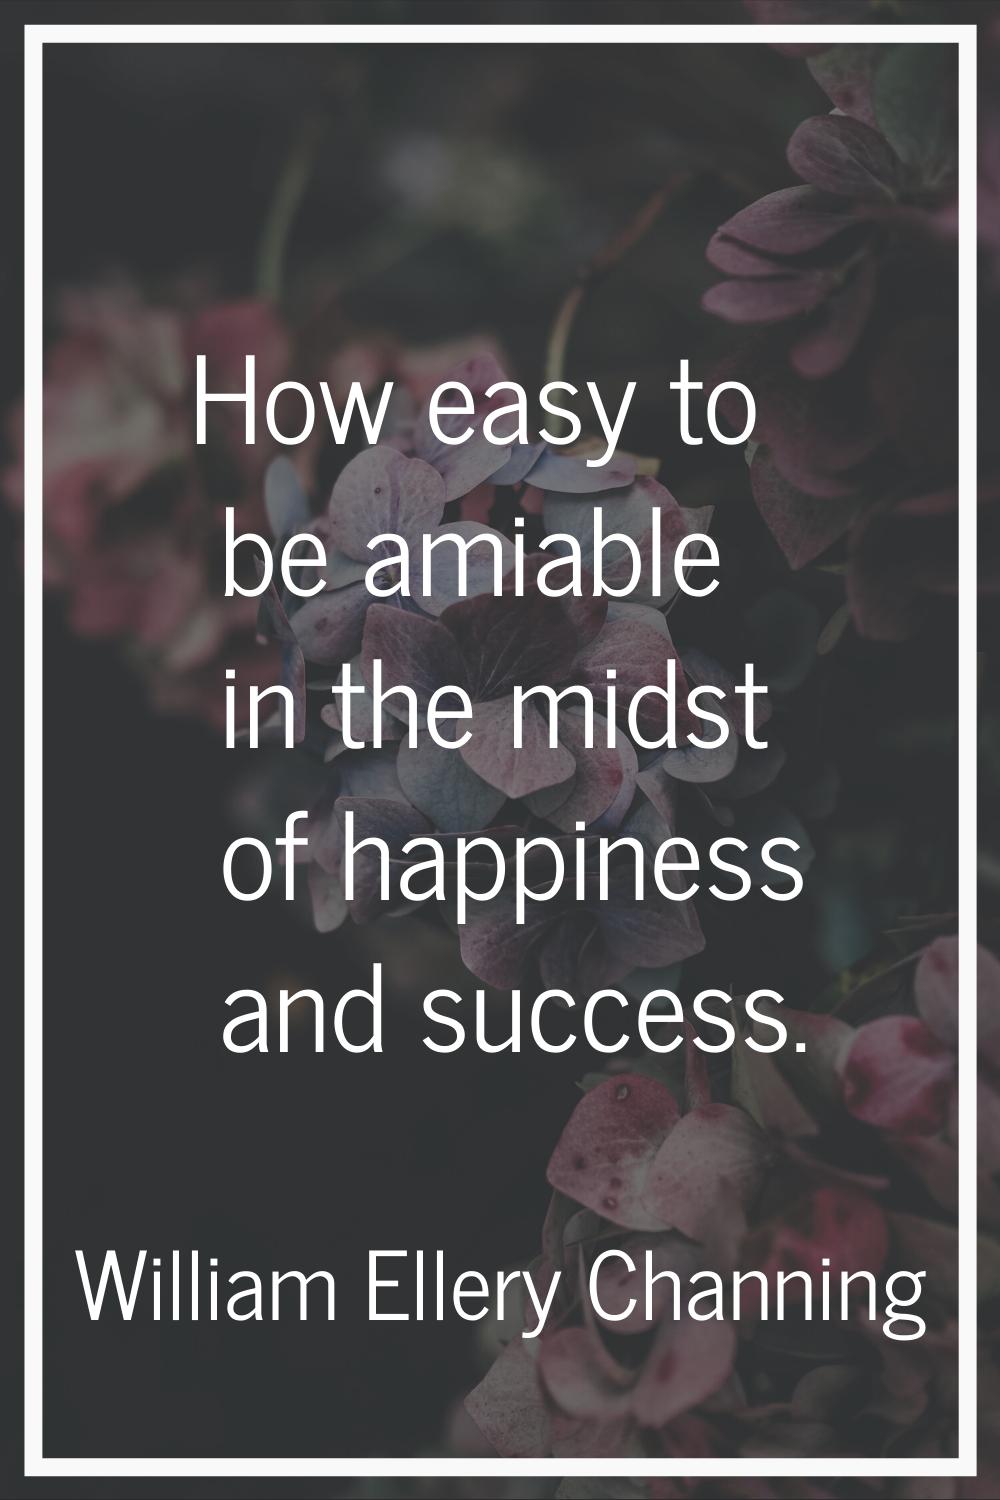 How easy to be amiable in the midst of happiness and success.